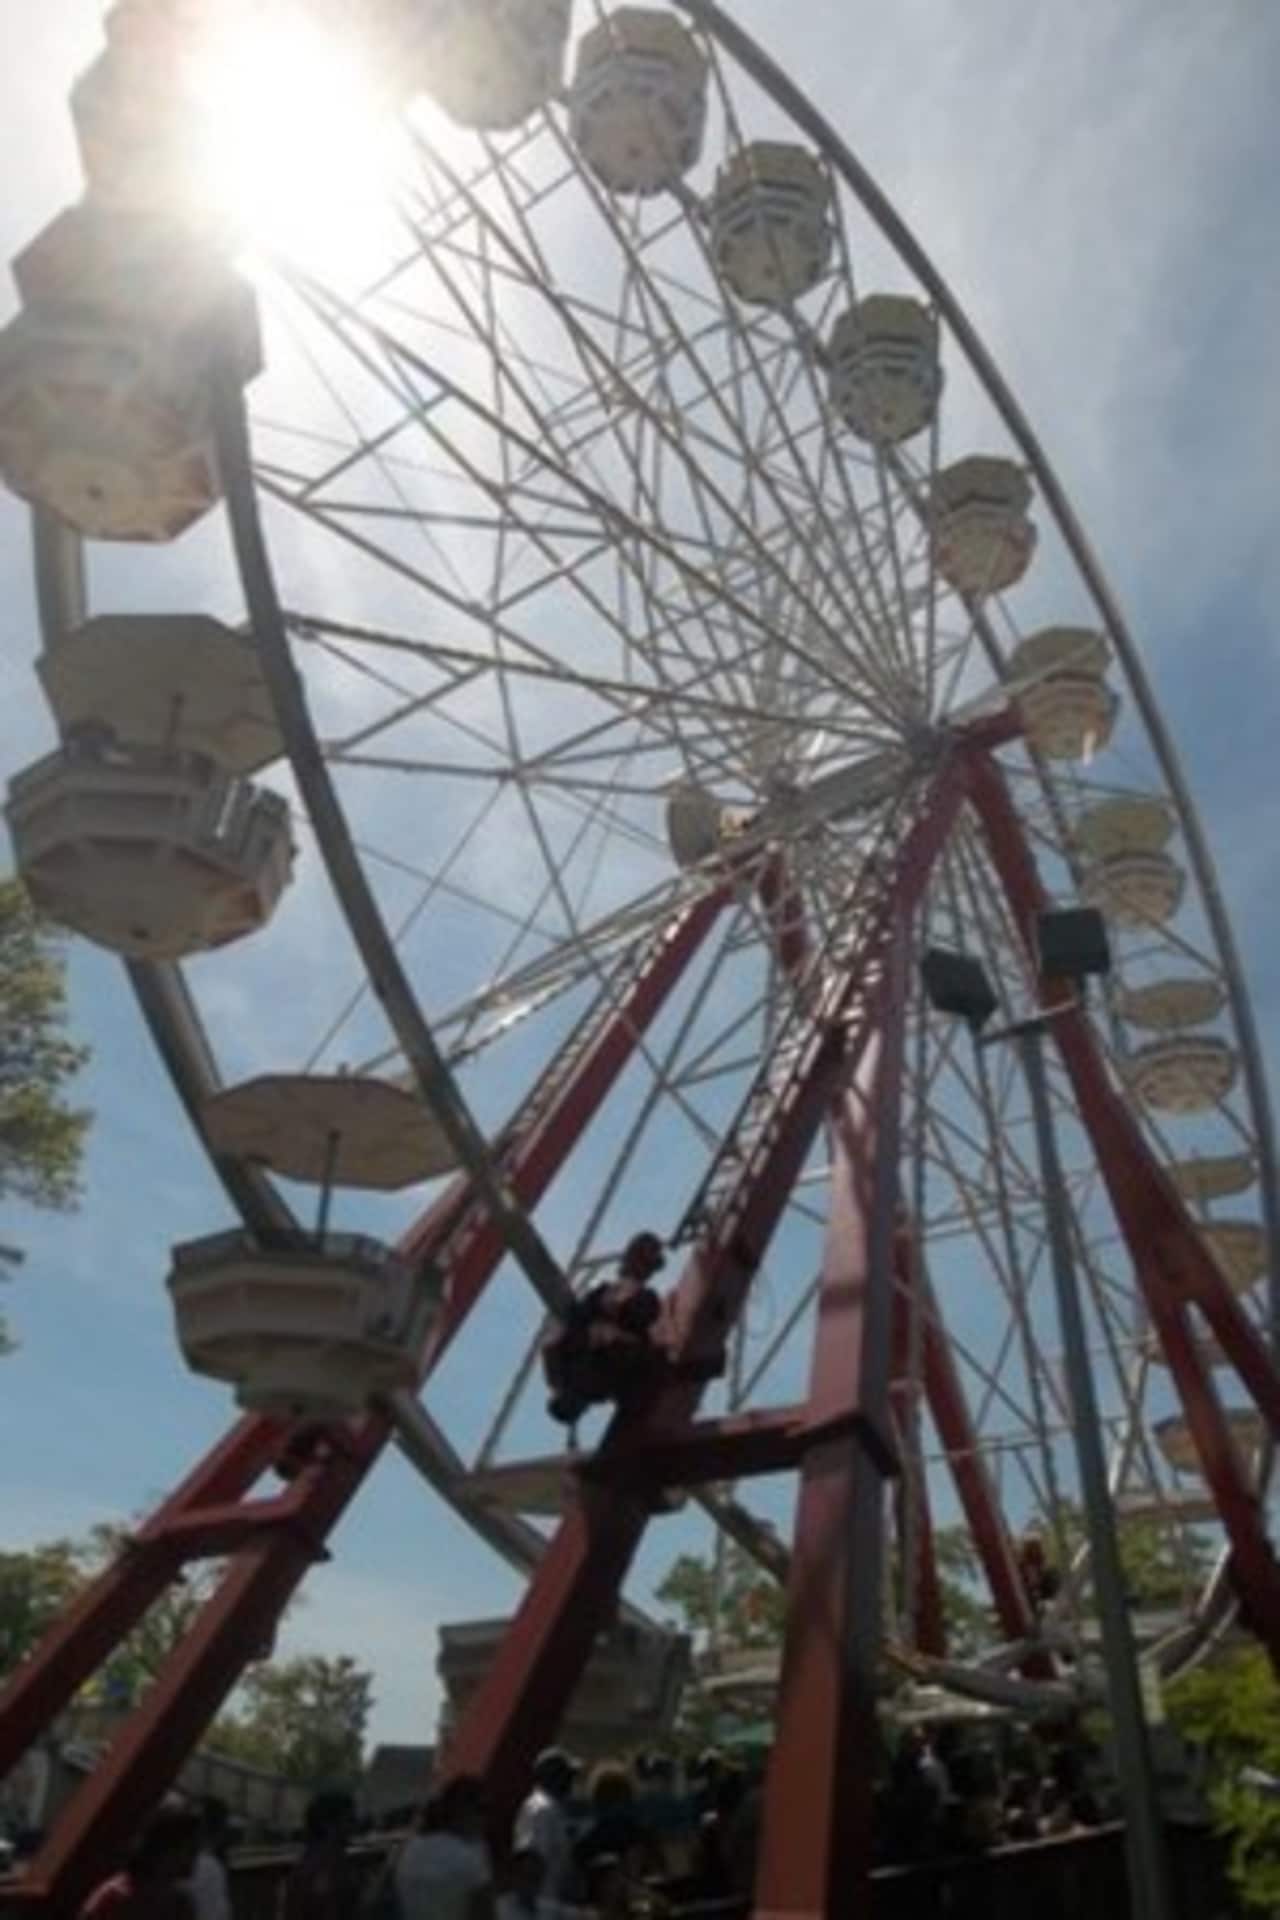 Rye Playland is set to open for the 2016 season on Saturday, May 7. Admission through the weekend costs $15. On Sunday, Mother's Day, moms ride for free.